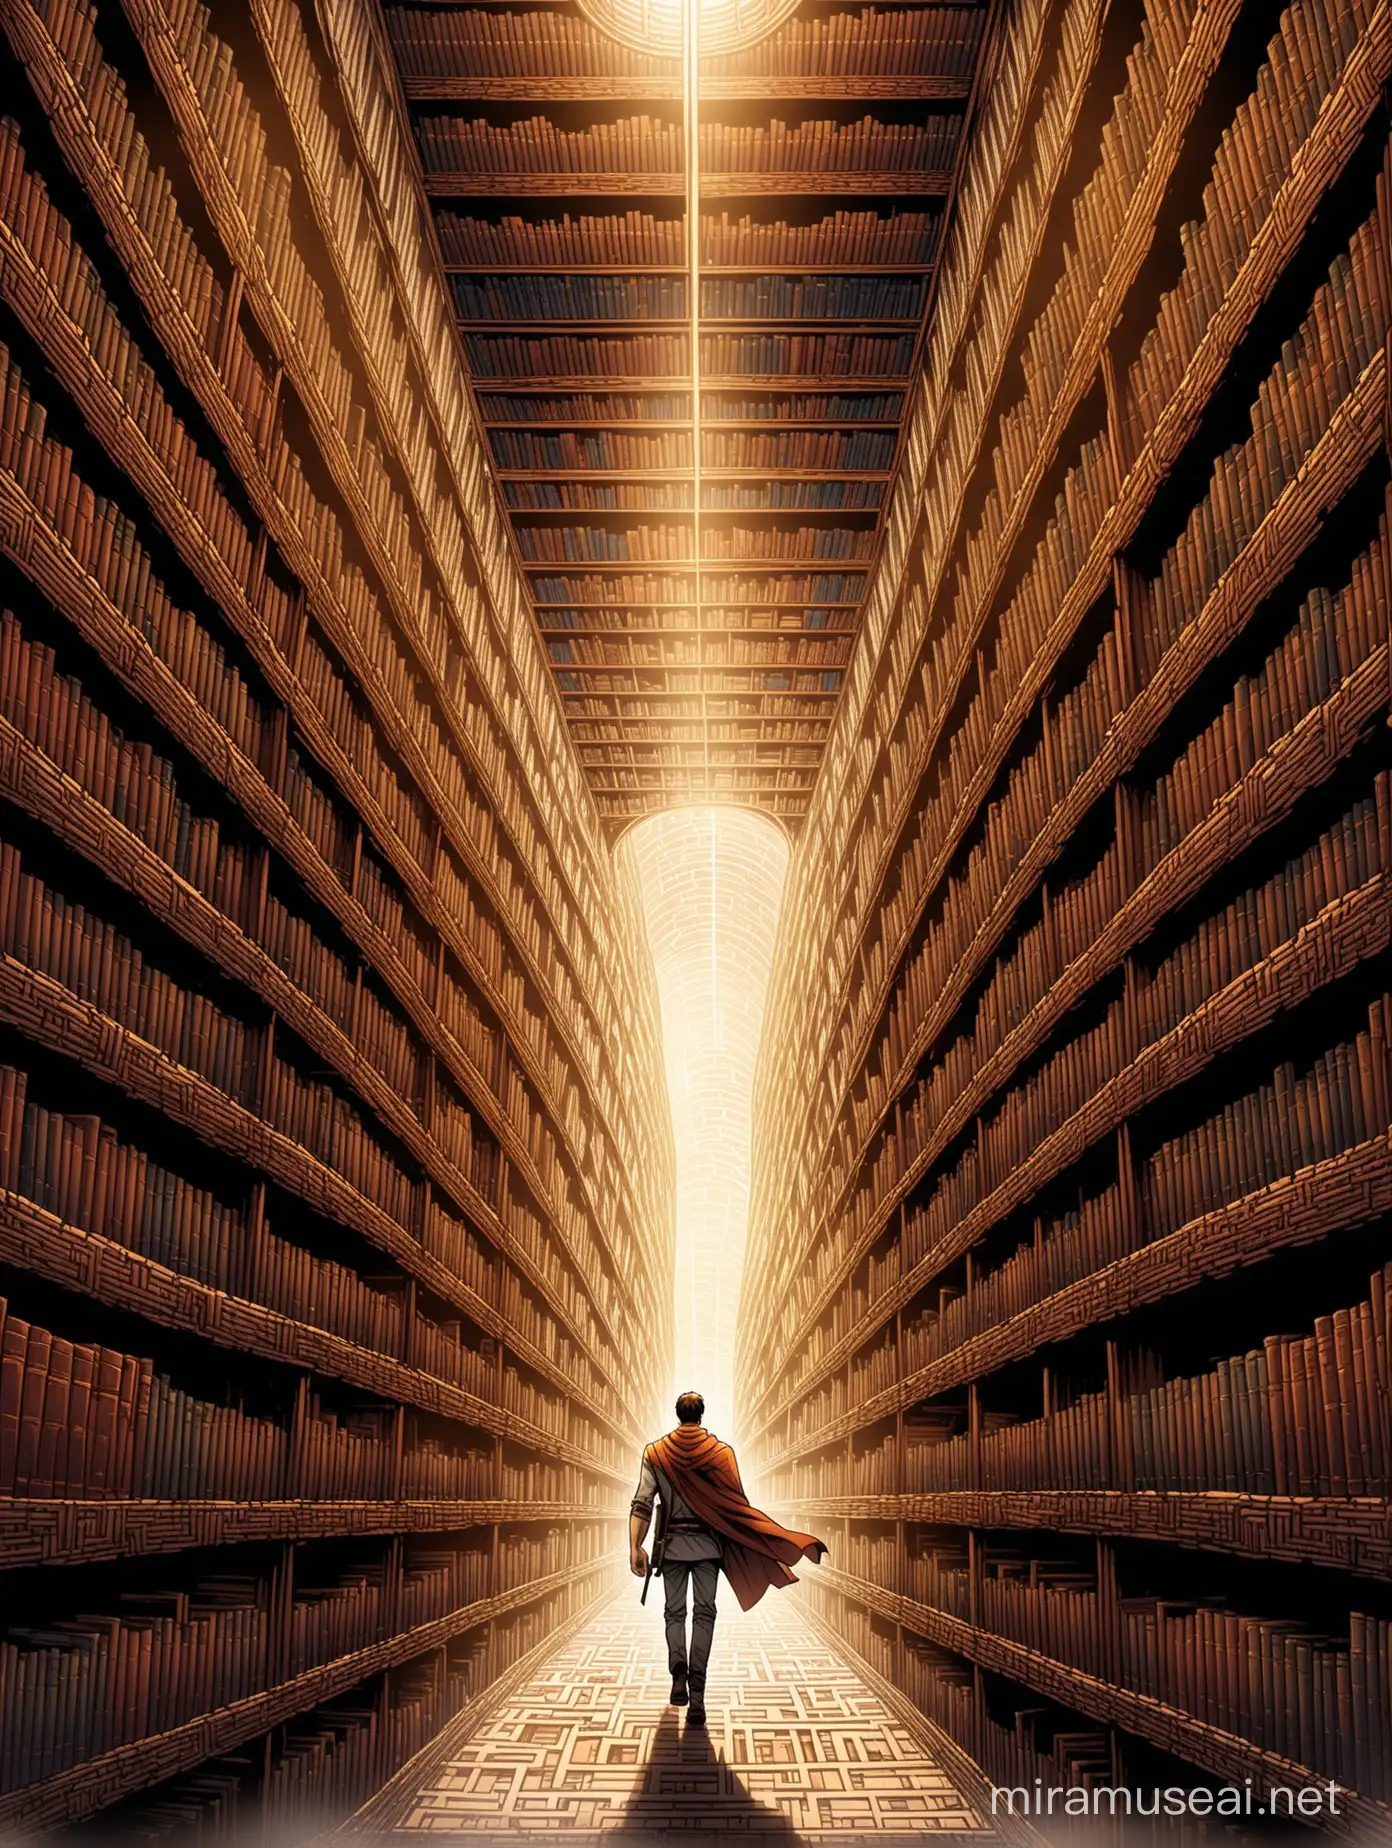 a hero walking through a maze of bookshelves in a library, surrounded by towering shelves filled with books representing different philosophies, ideologies, and perspectives, fantasy style